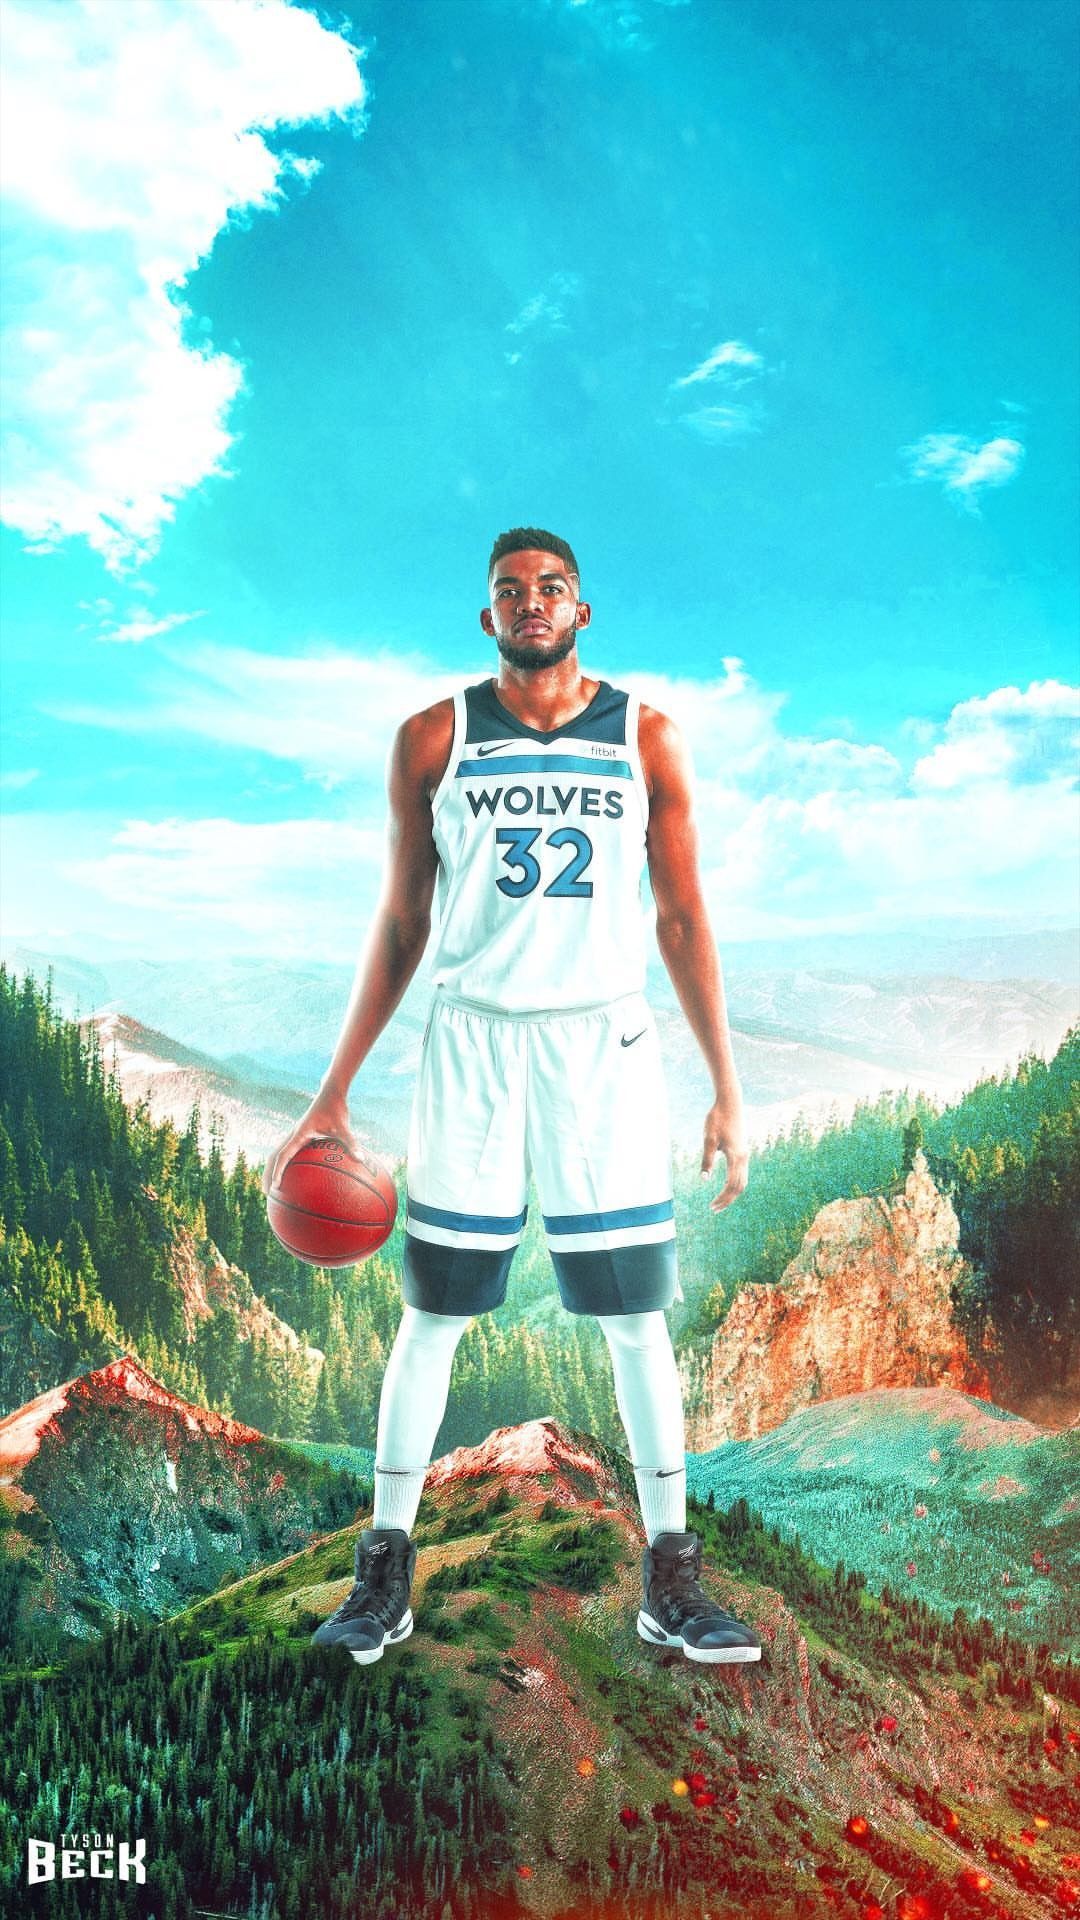 VS Editz on Instagram karltowns Graphic Is he a top 10 player in the  nba  Drop a like if you are hyped for the NBA to resume Comment stuff Tag  karltow  스포츠